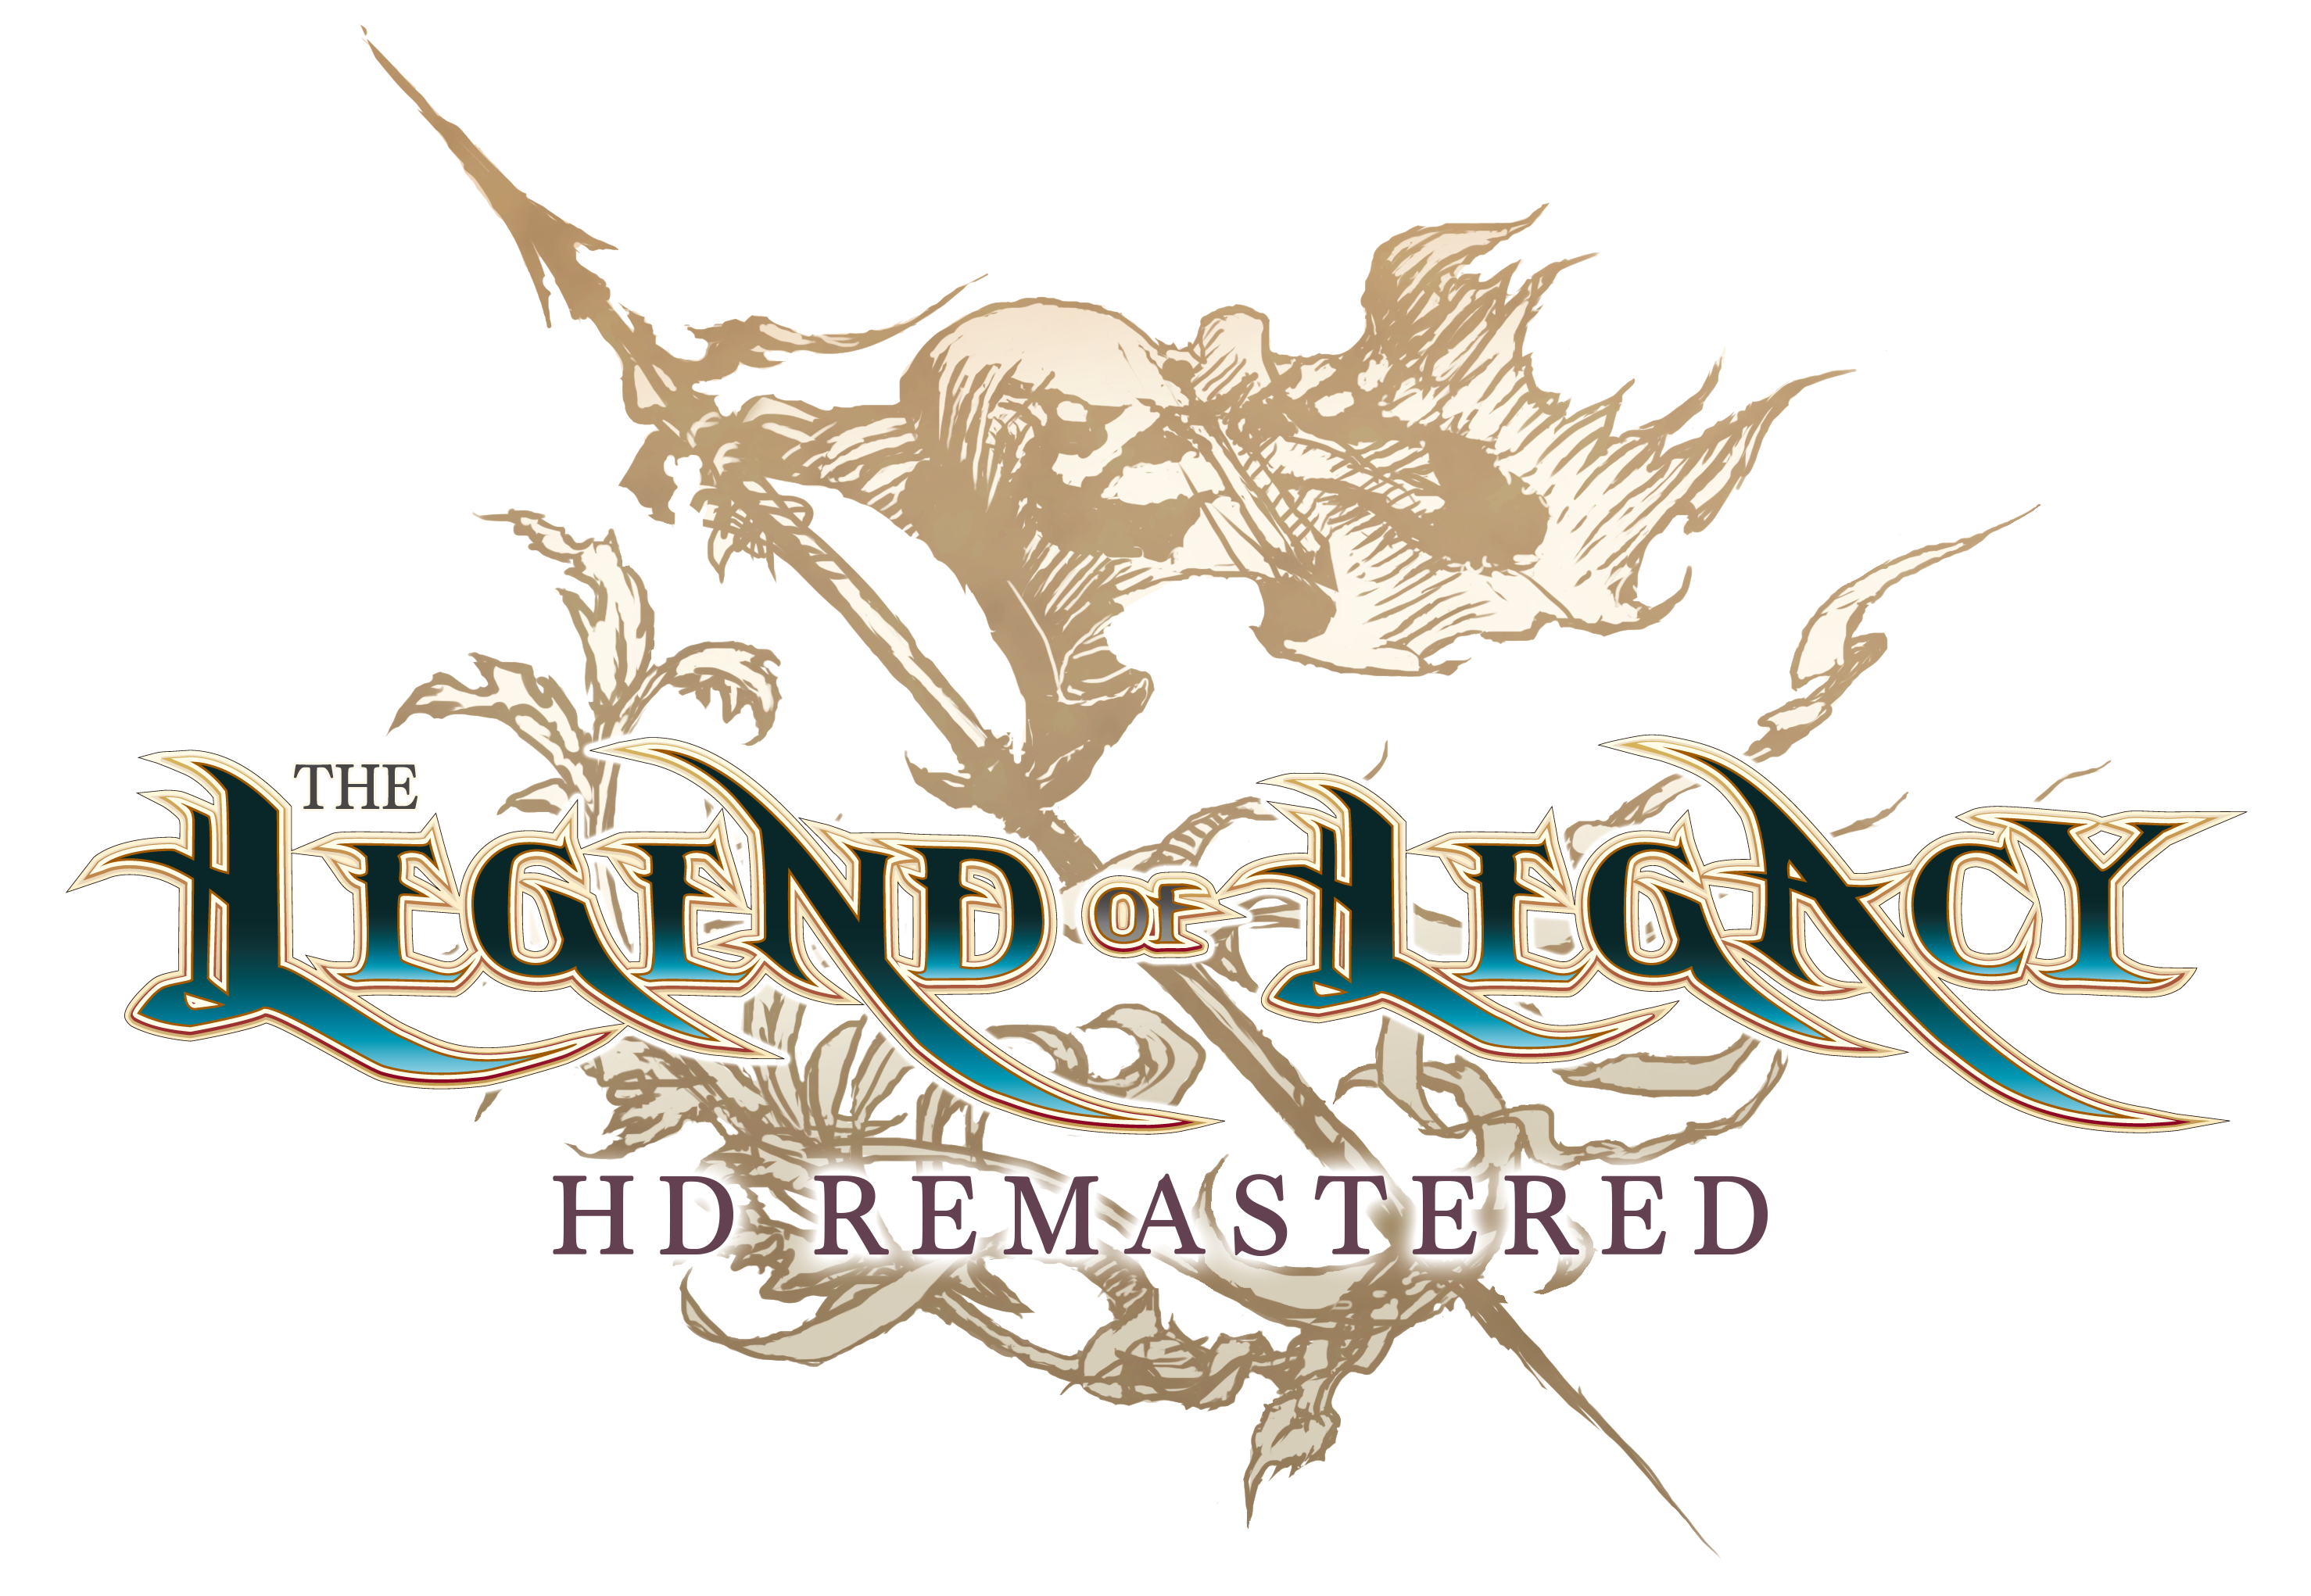 The Legend of Legacy HD Remastered Release Date Announcement and Gameplay Trailer!